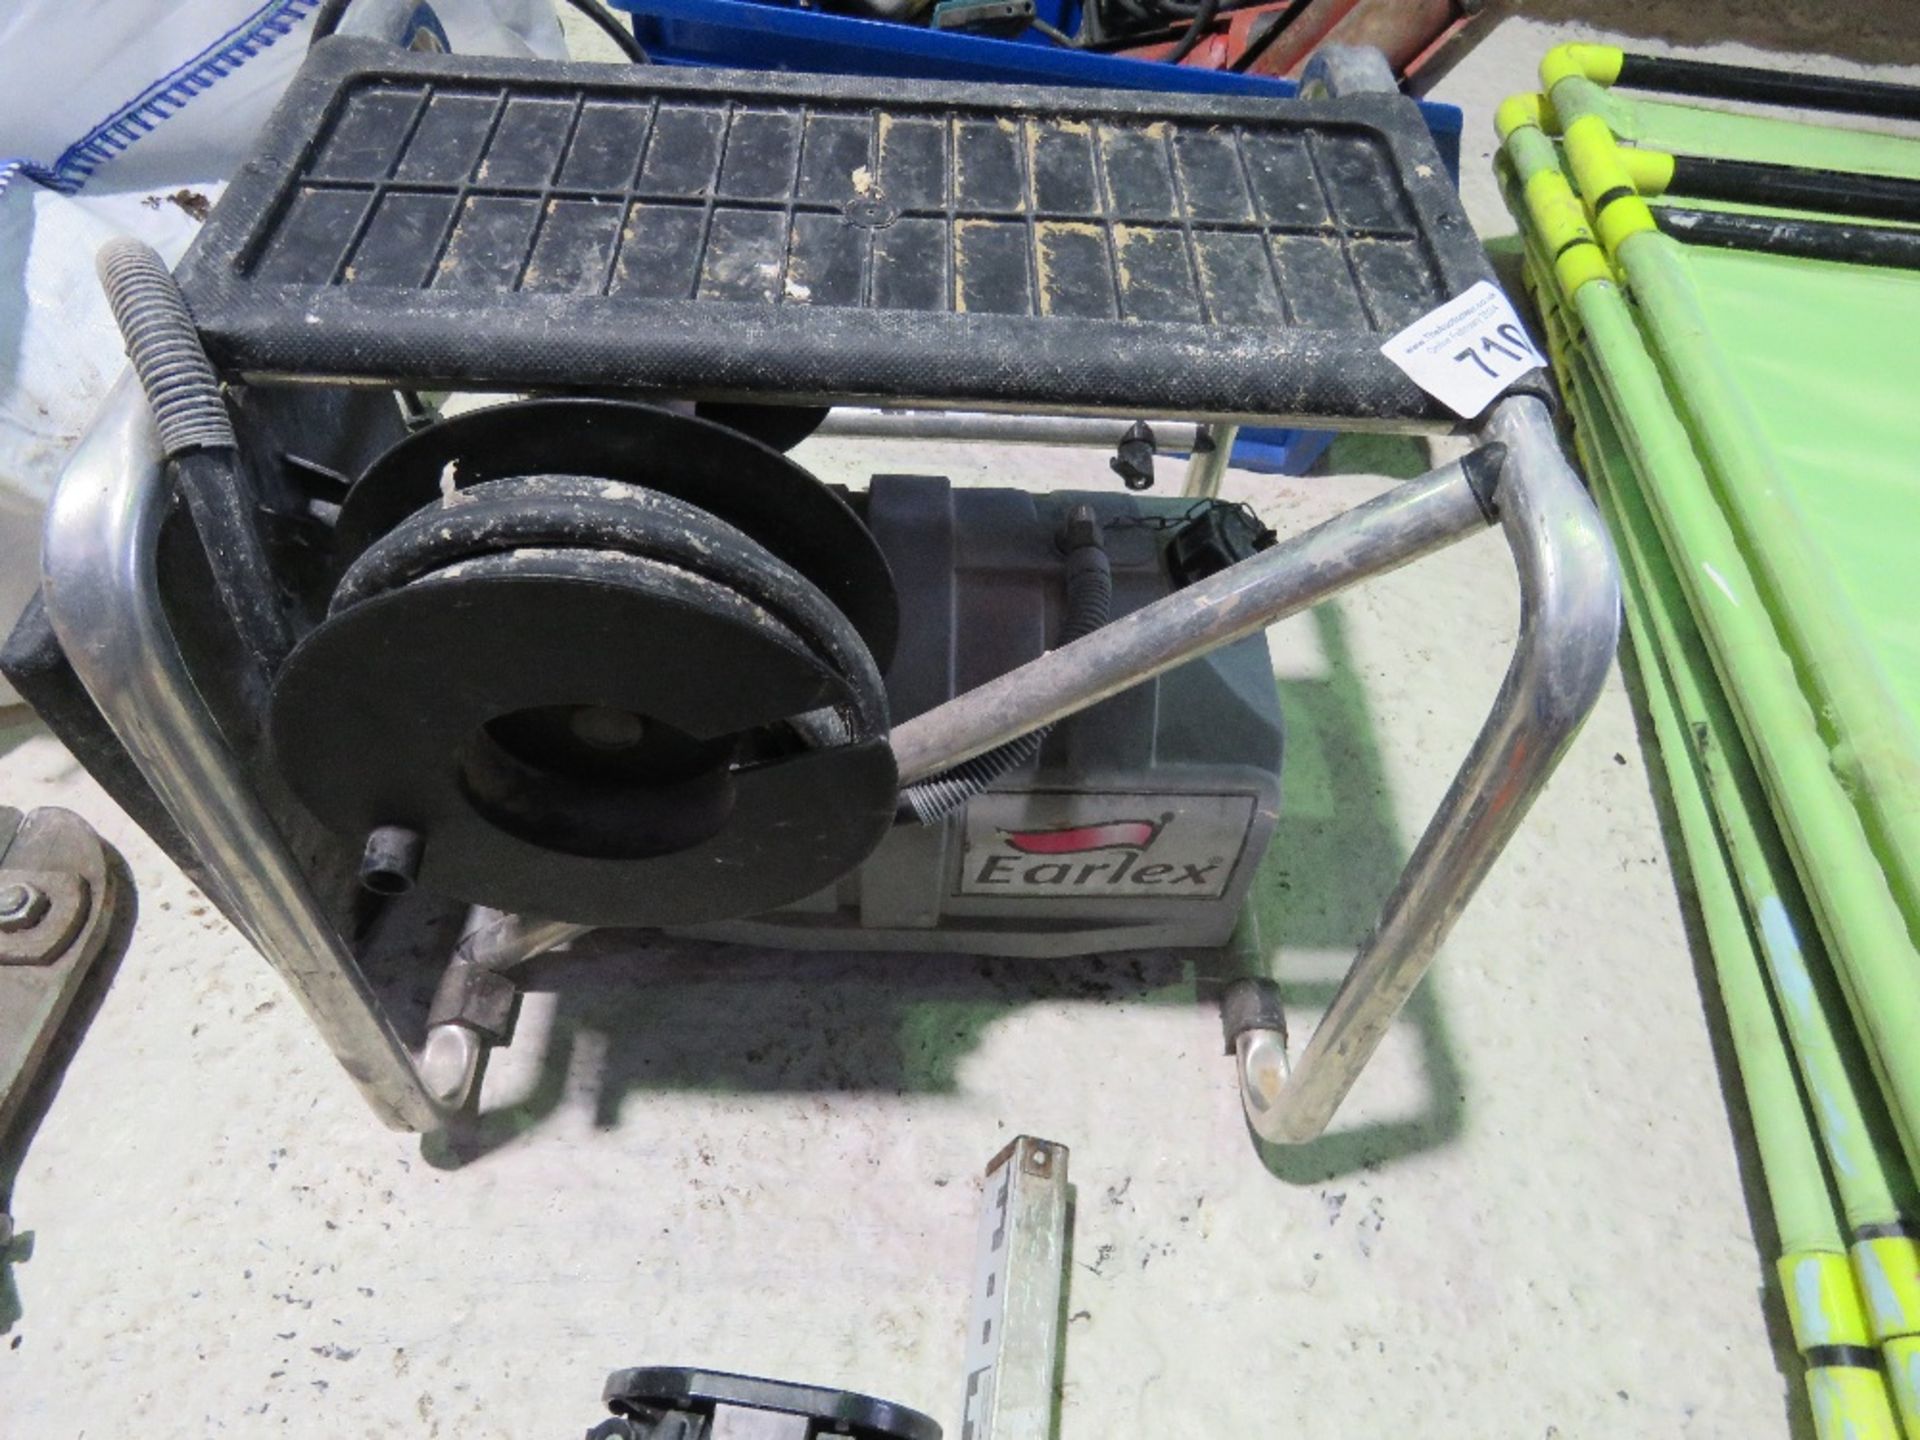 EARLEX 240VOLT WALLPAPER STRIPPER. SOURCED FROM COMPANY LIQUIDATION. THIS LOT IS SOLD UNDER THE